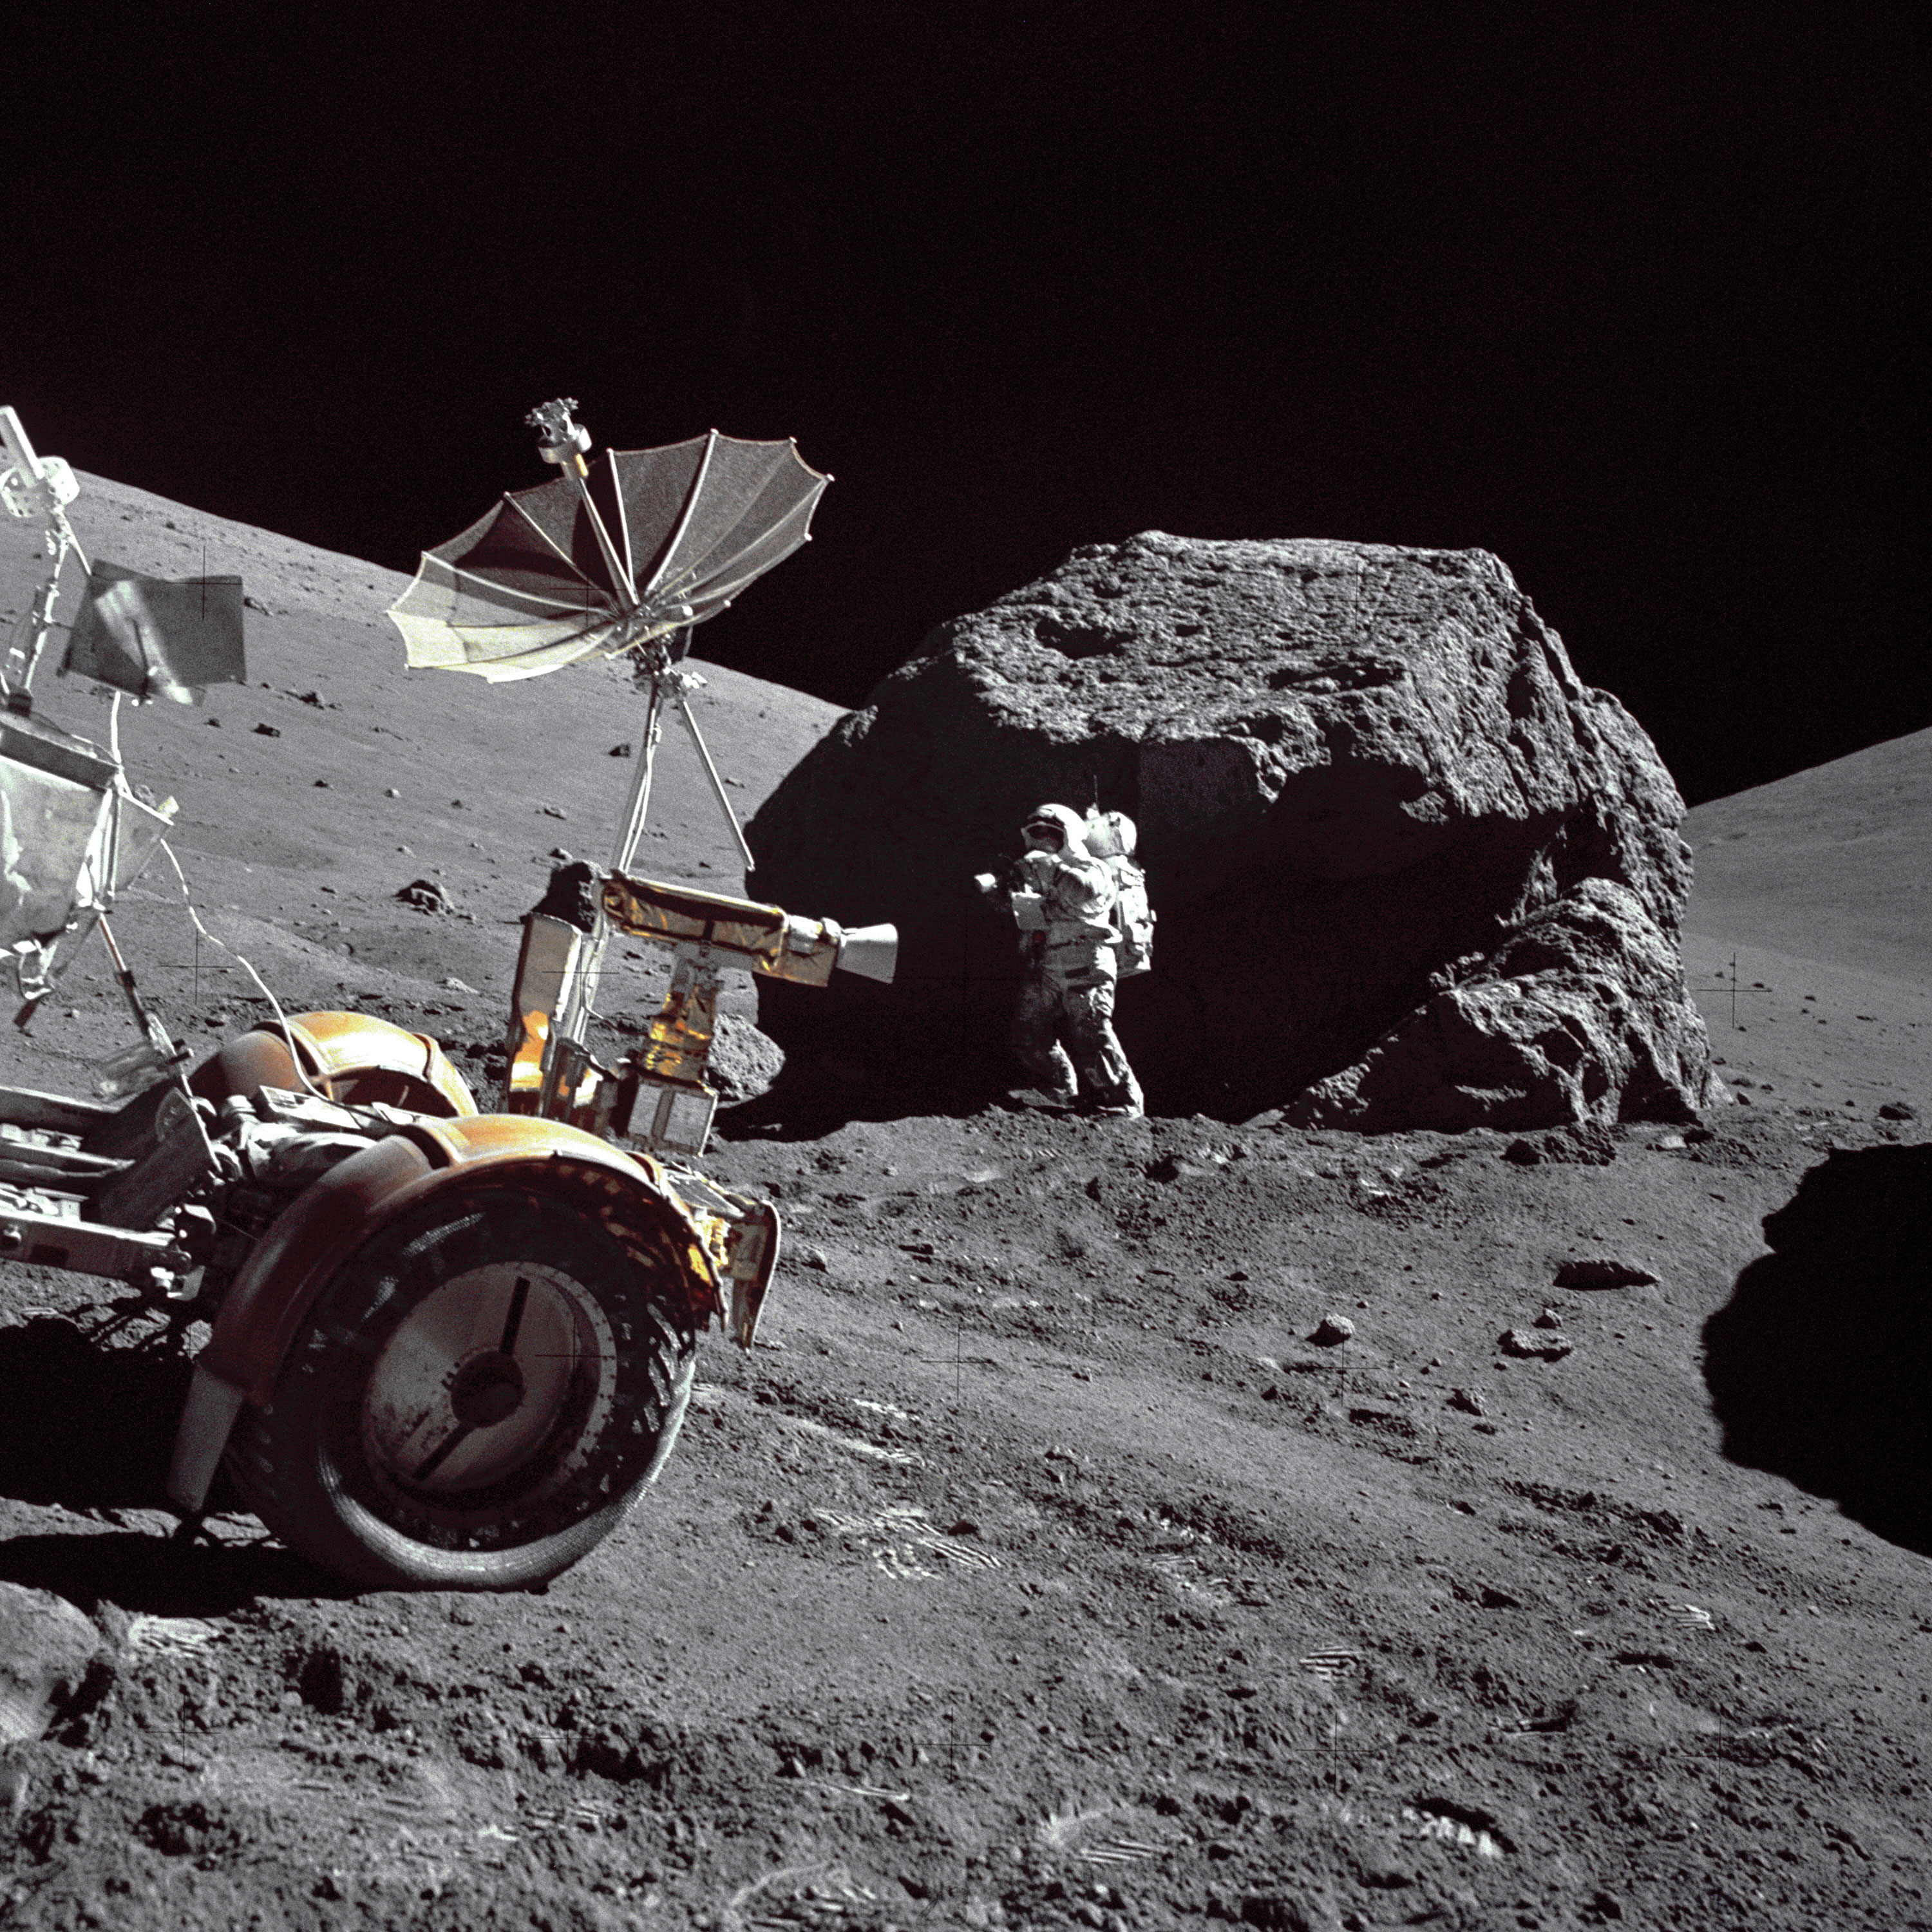 Harrison Schmitt stands next to a huge, split boulder on the sloping base of North Massif during EVA-3 at the Taurus-Littrow landing site. Credit: NASA